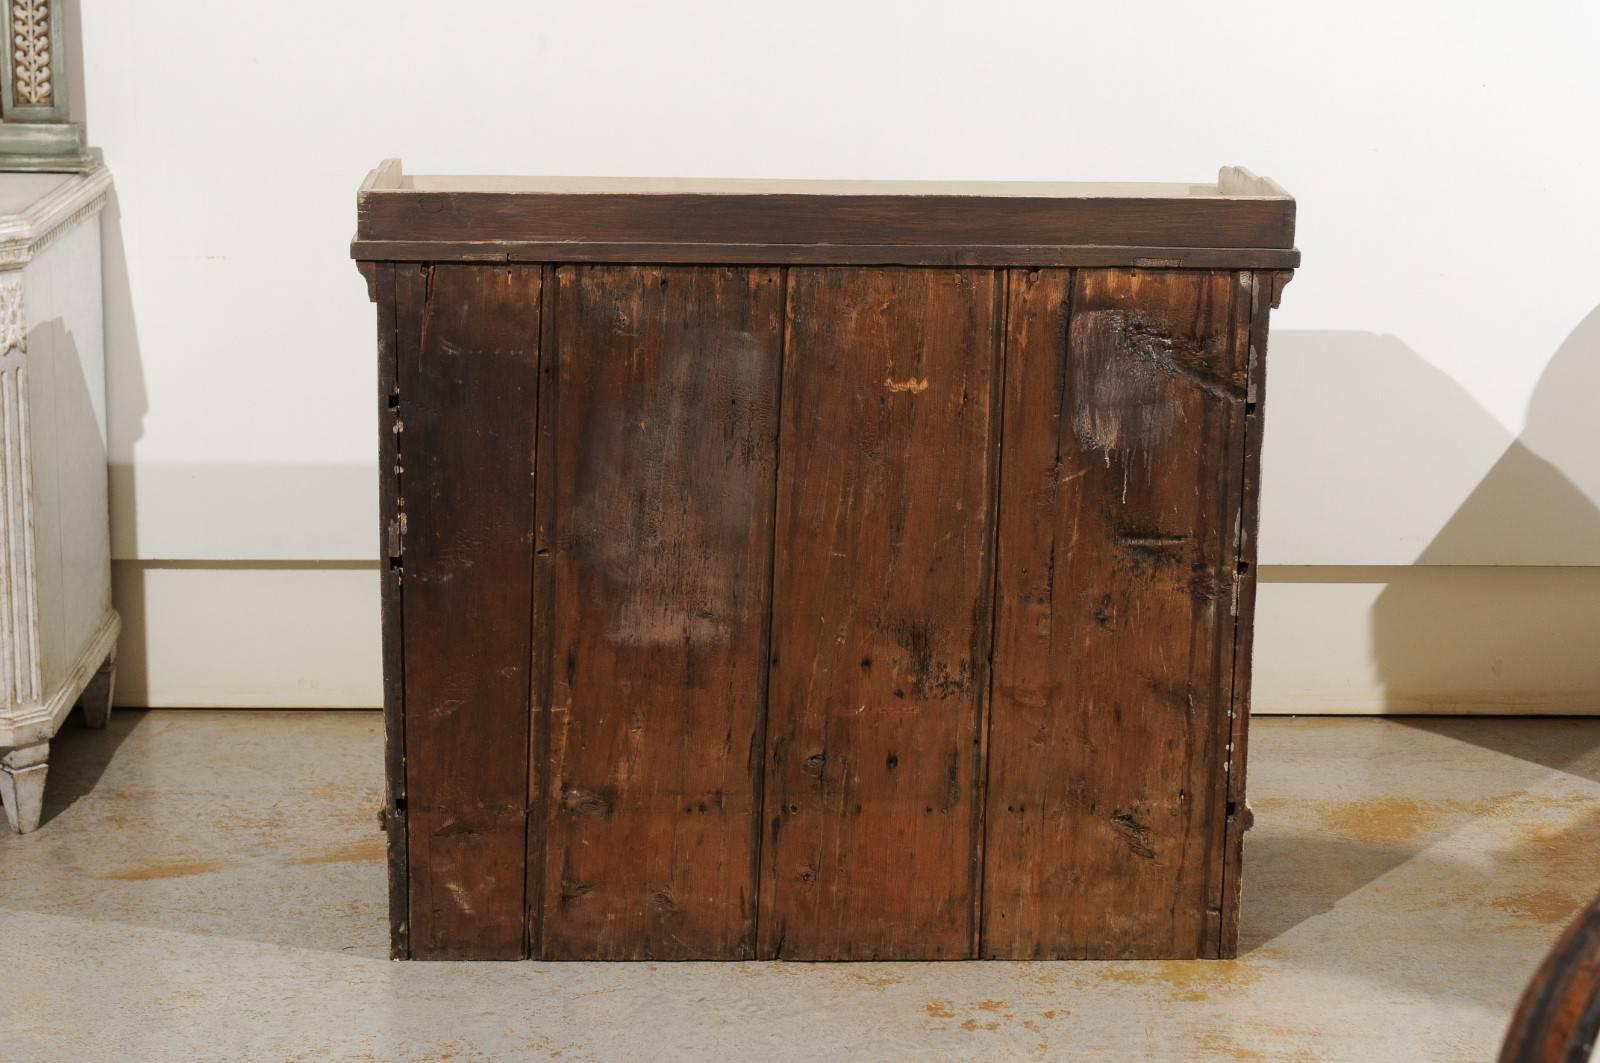 1810s Swedish Period Gustavian Painted Sideboard with Reeded Diamond Motifs 3